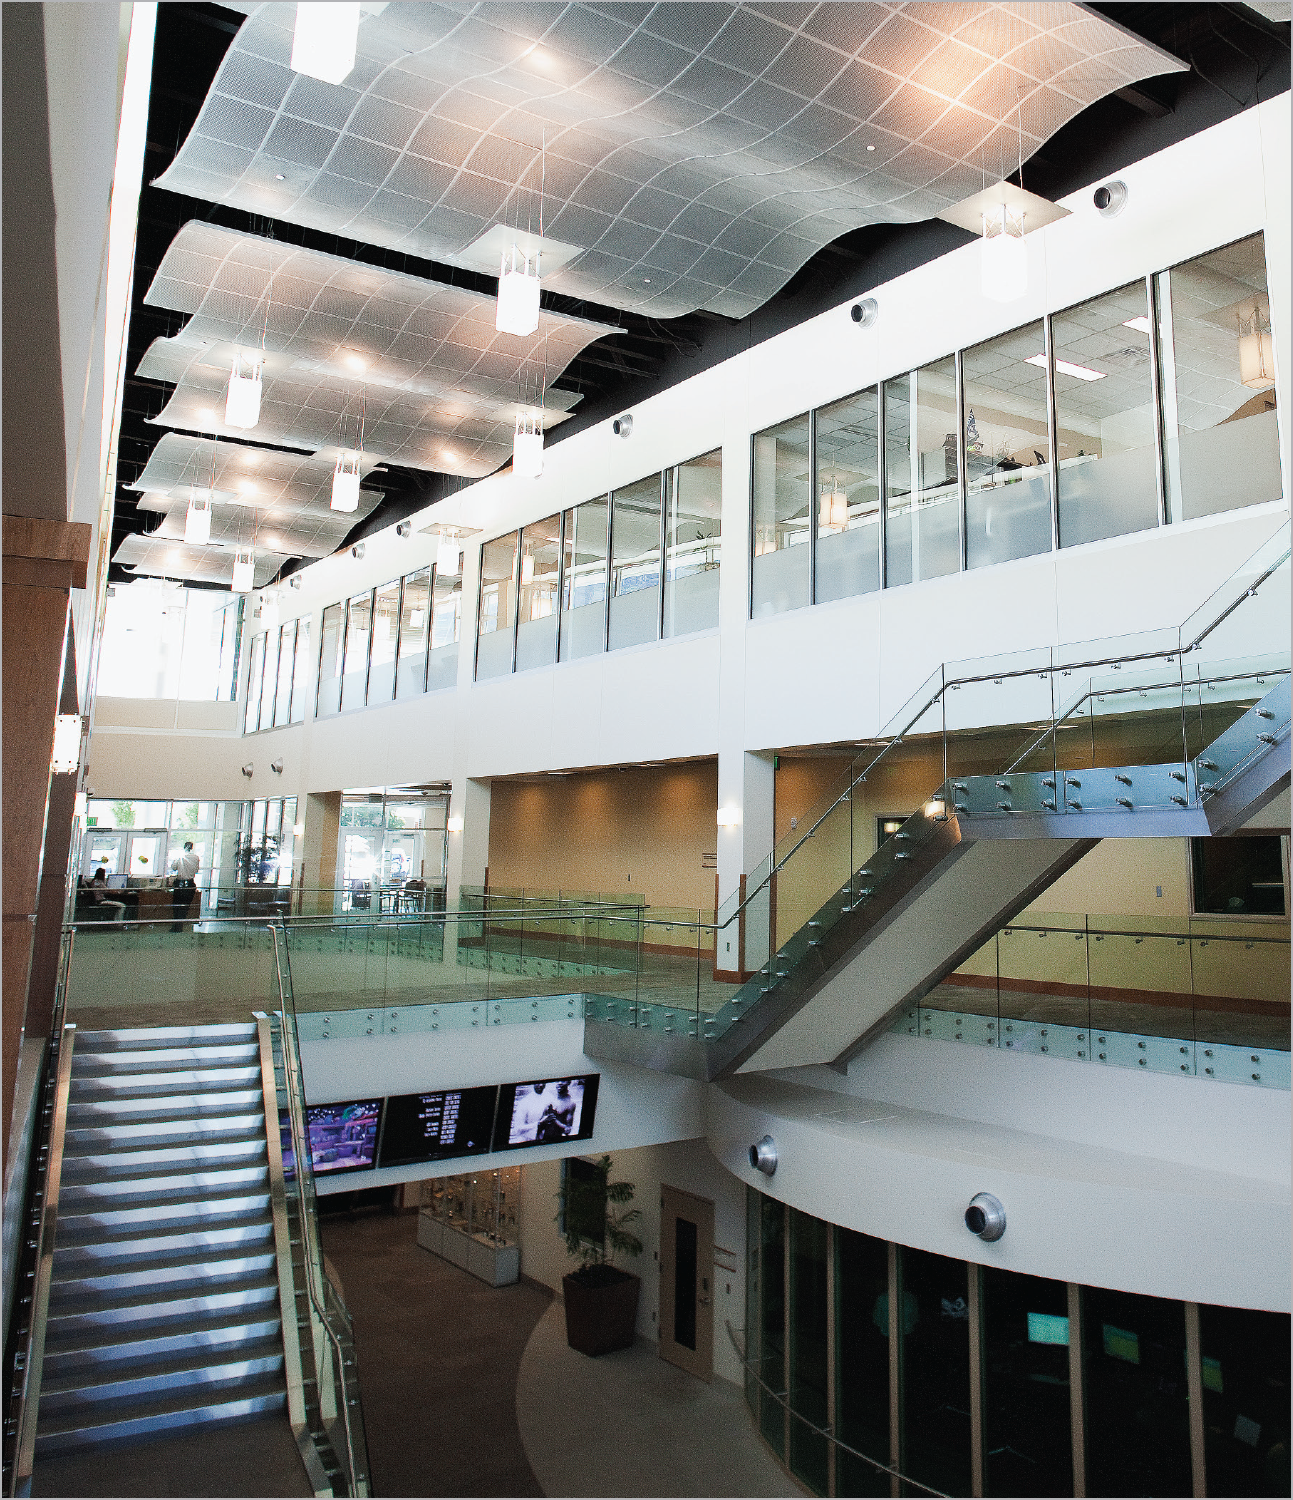 Interior of the BYU Broadcasting building